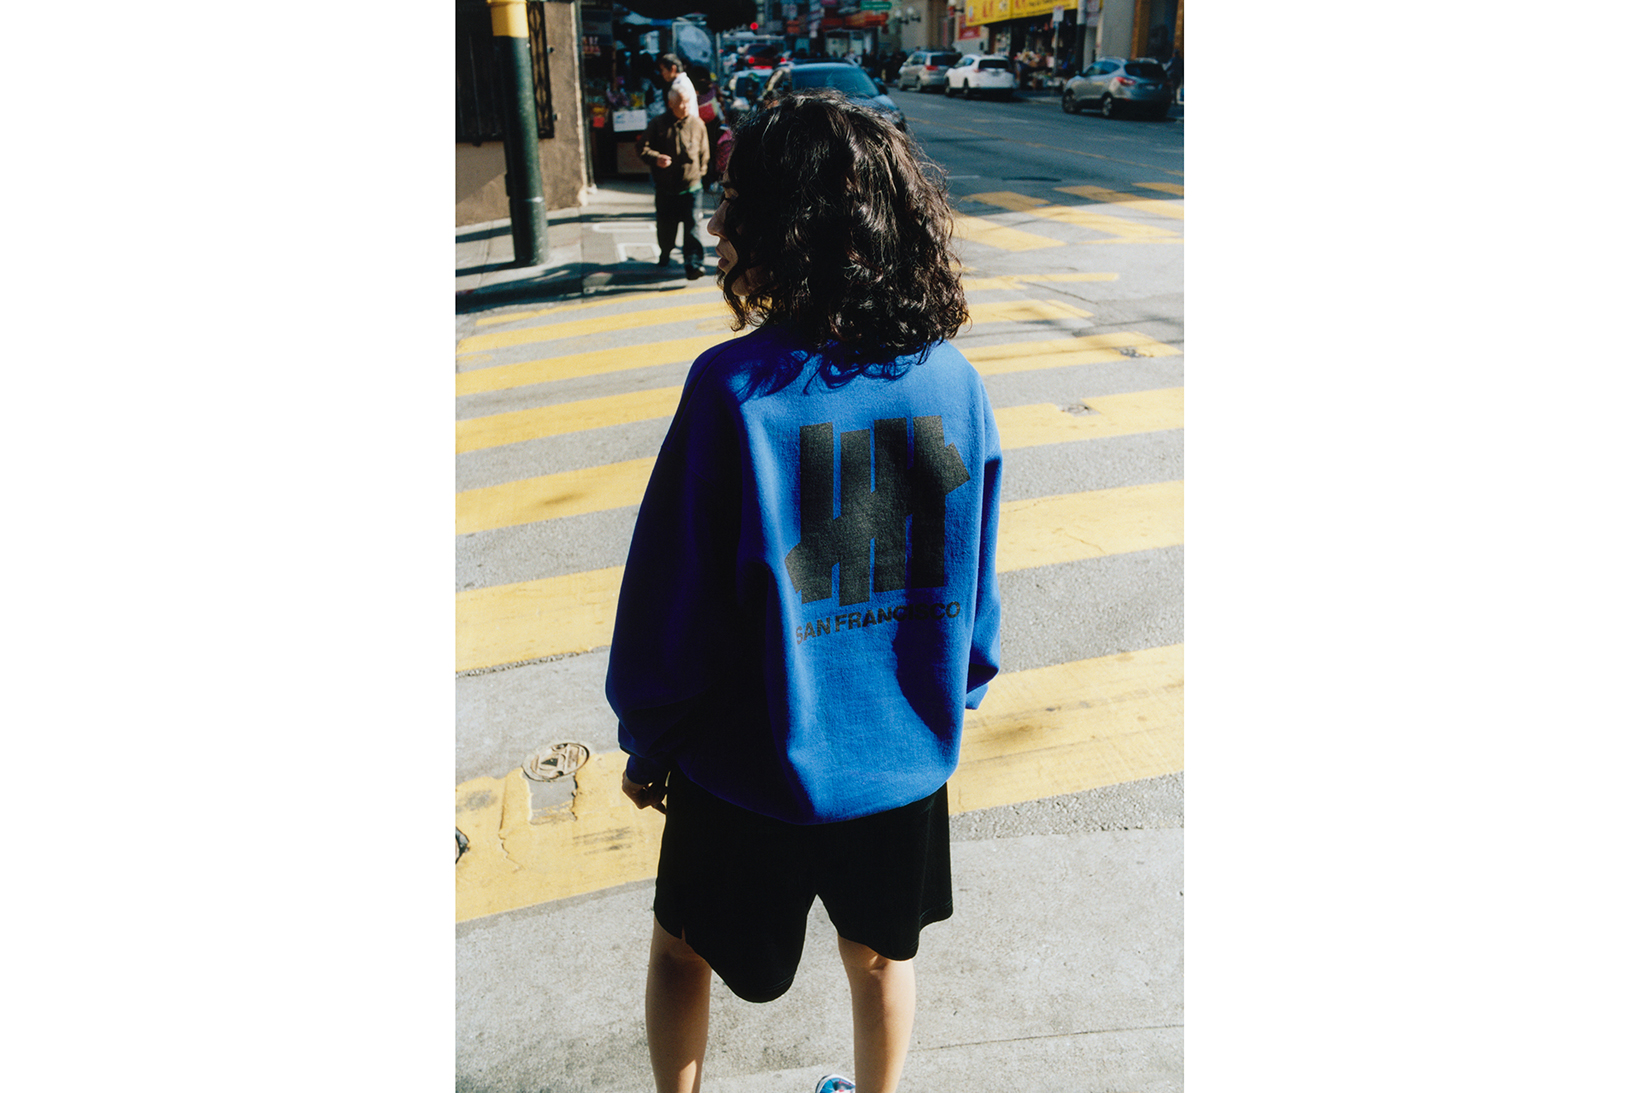 UNDEFEATED Summer 2018 Drop 2 editorial lookbook may 25 release date info drop